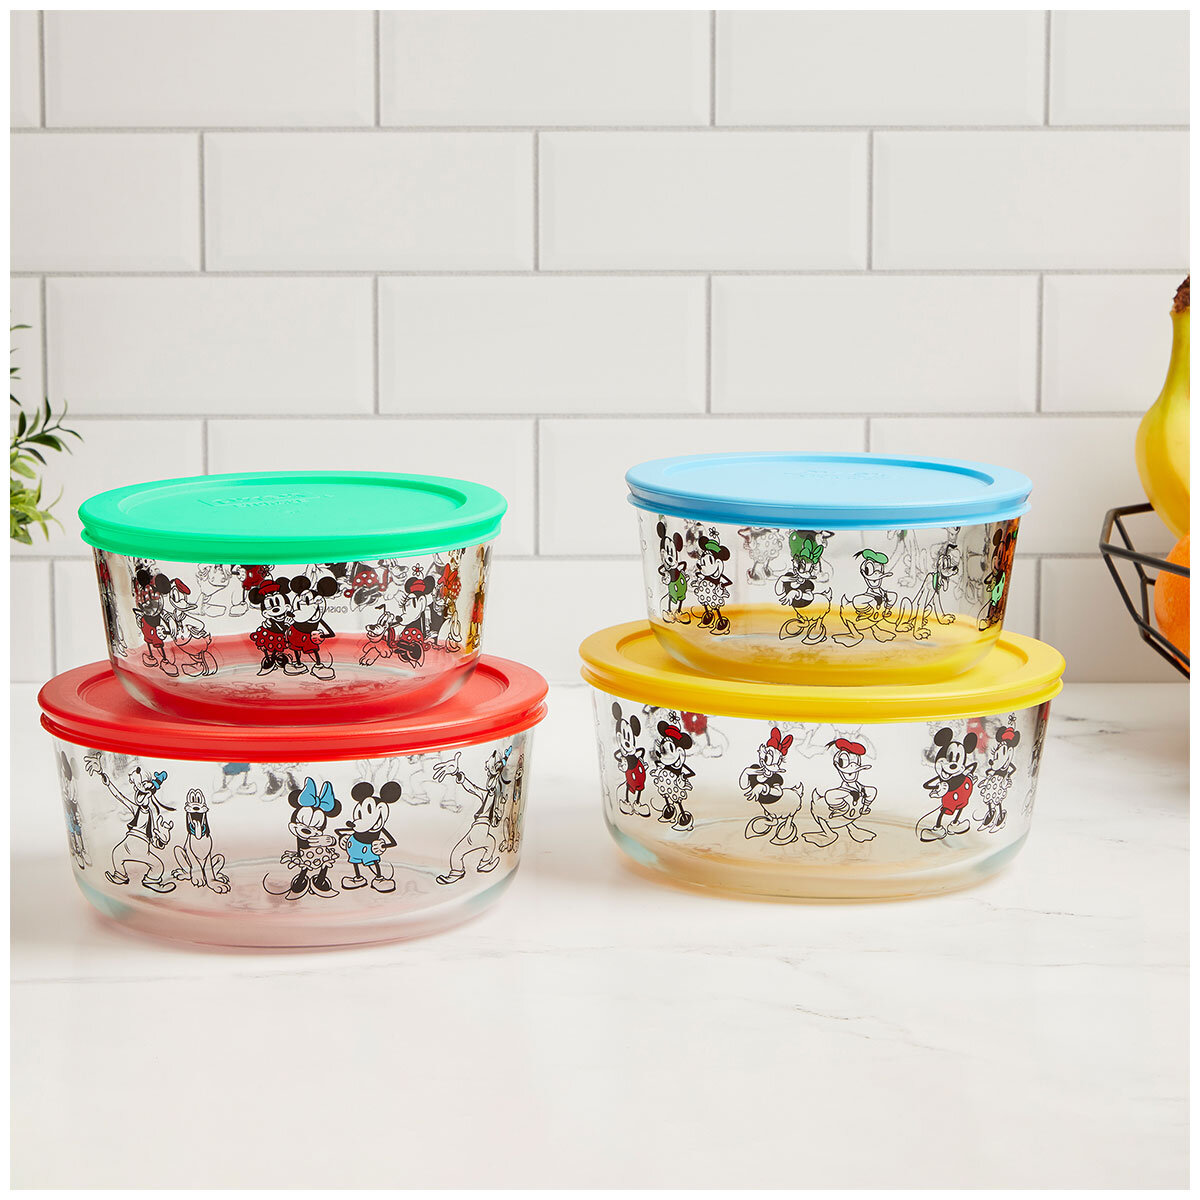 Mickey Mouse Pyrex Collection Makes Leftovers Magical - Decor 